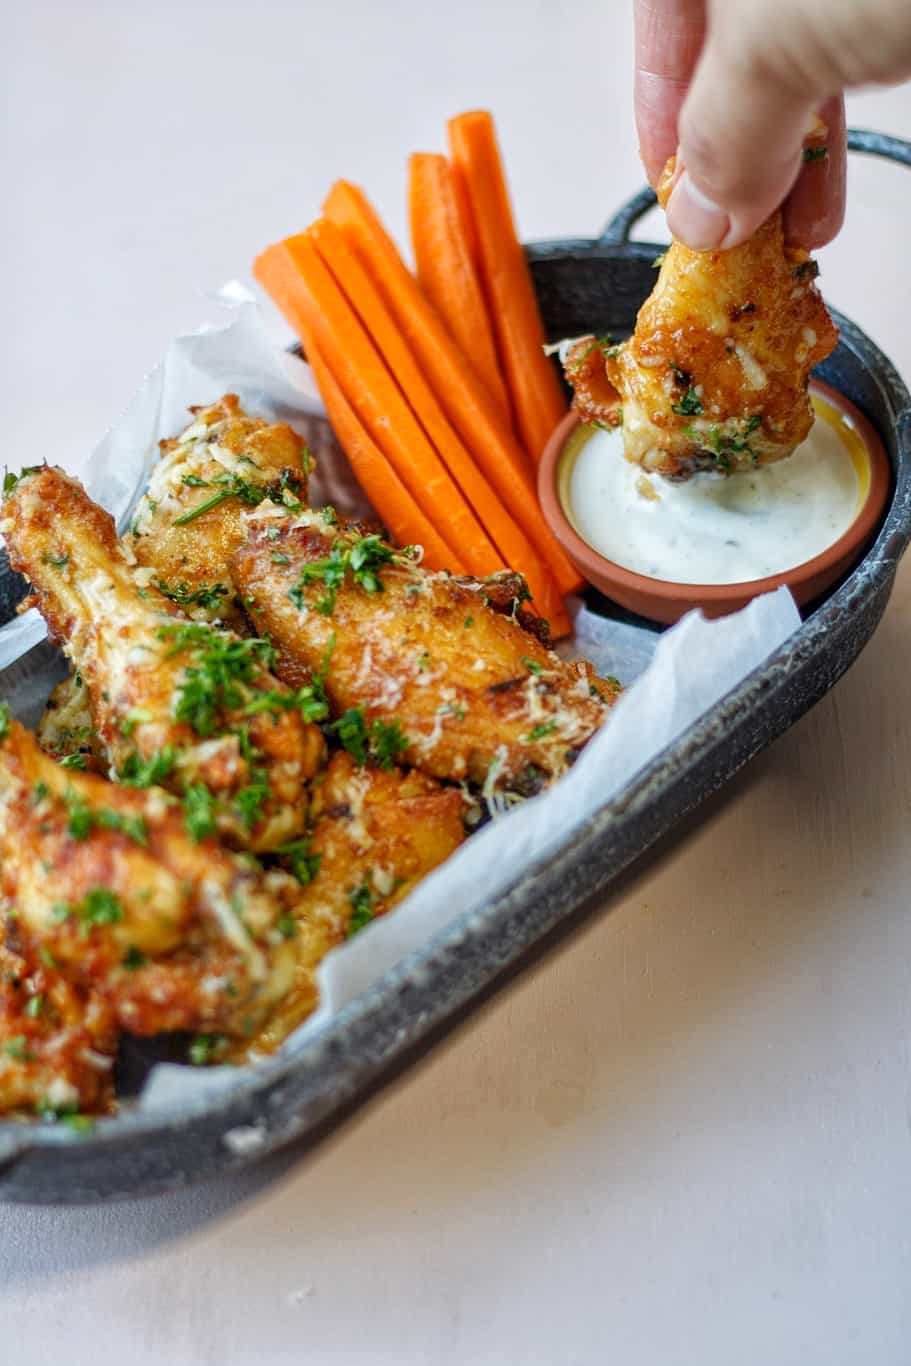 crispy chicken wings dipped in a hearty sauce garnished with finely chopped fresh parsley and served with roasted carrots